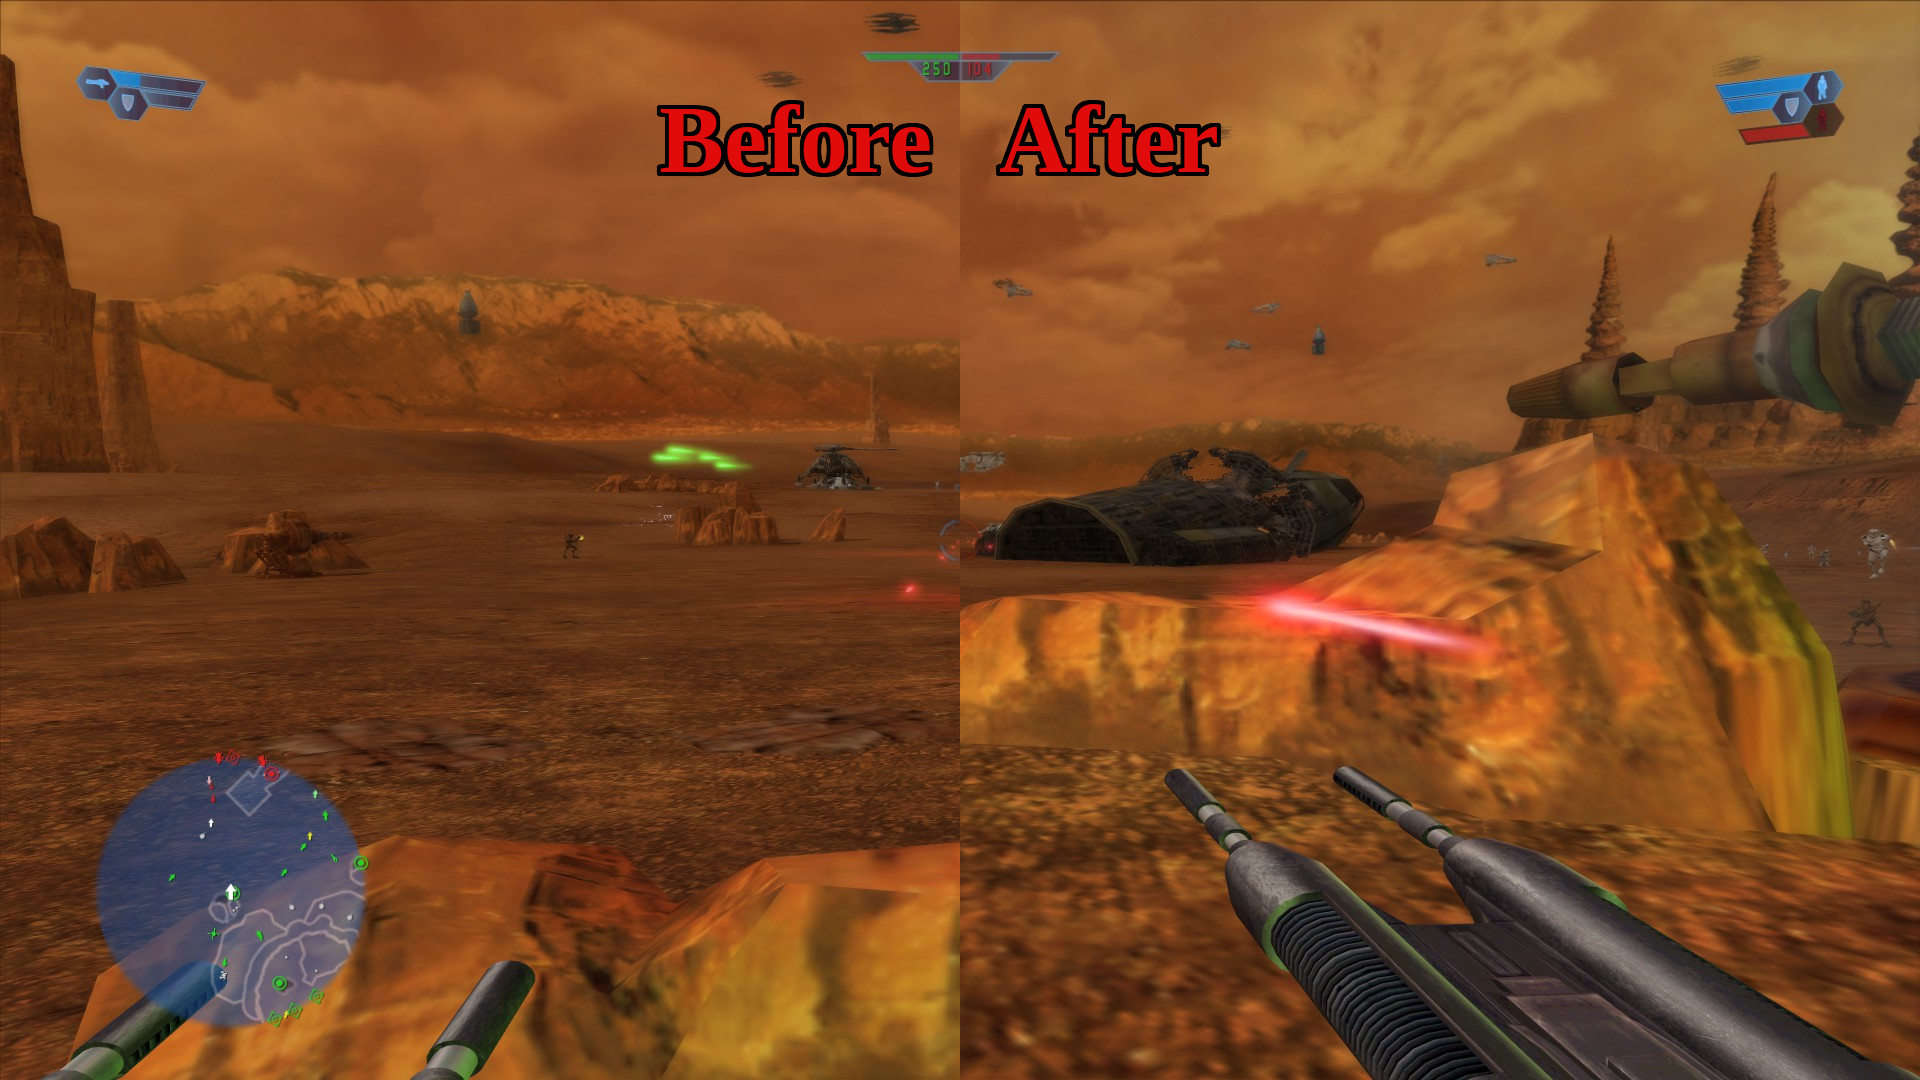 Star wars battlefront classic collection купить. Батлфронт 1 2005. Star Wars Battlefront 1. Стар ВАРС батлфронт Классик 2004. Star Wars Battlefront 1 2004.